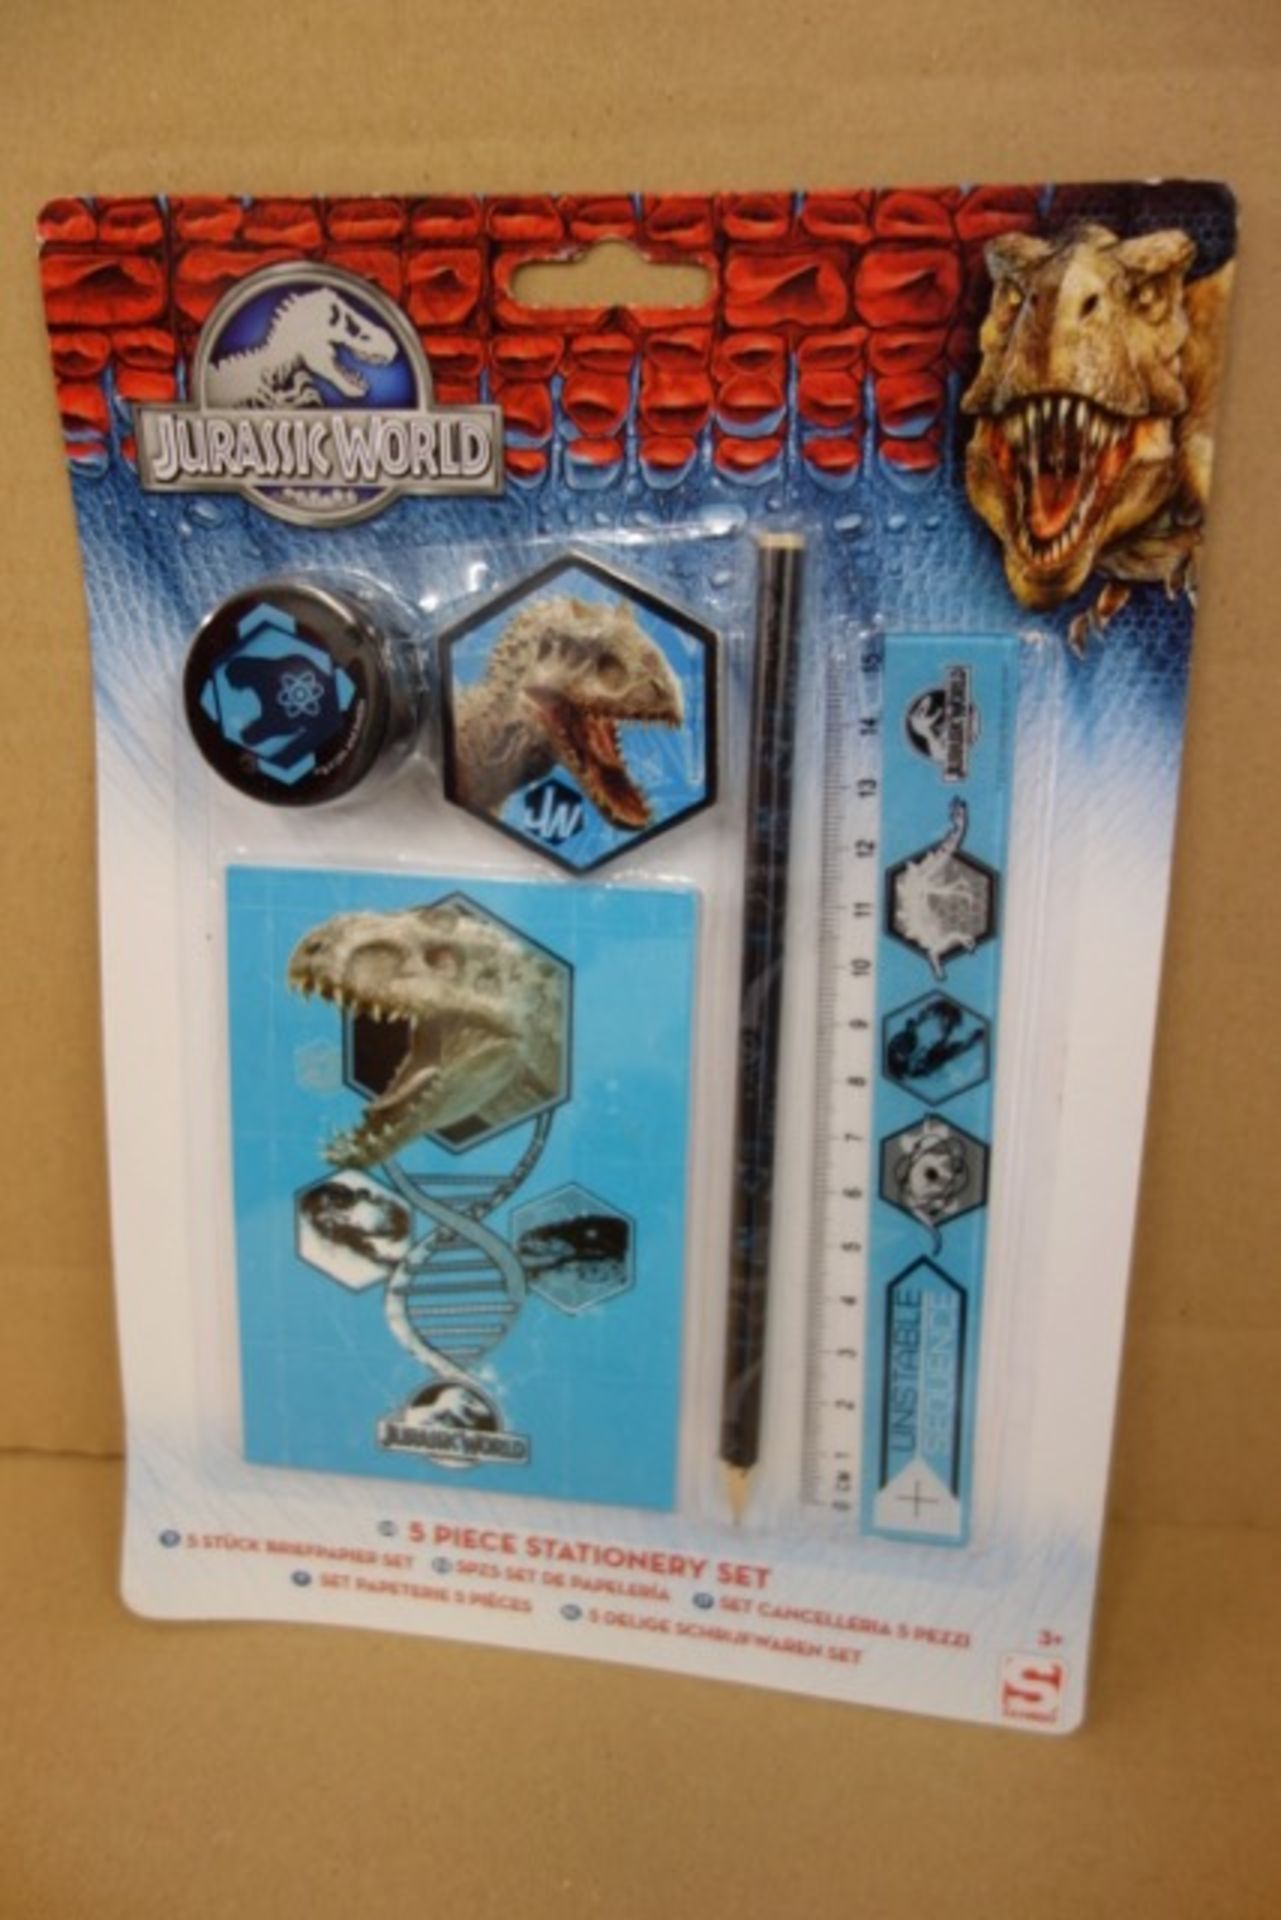 108 x Brand New Jurassic World 5 Piece Stationary Set's. Includes Pencil, Sharpener, Note Pad, Ruler